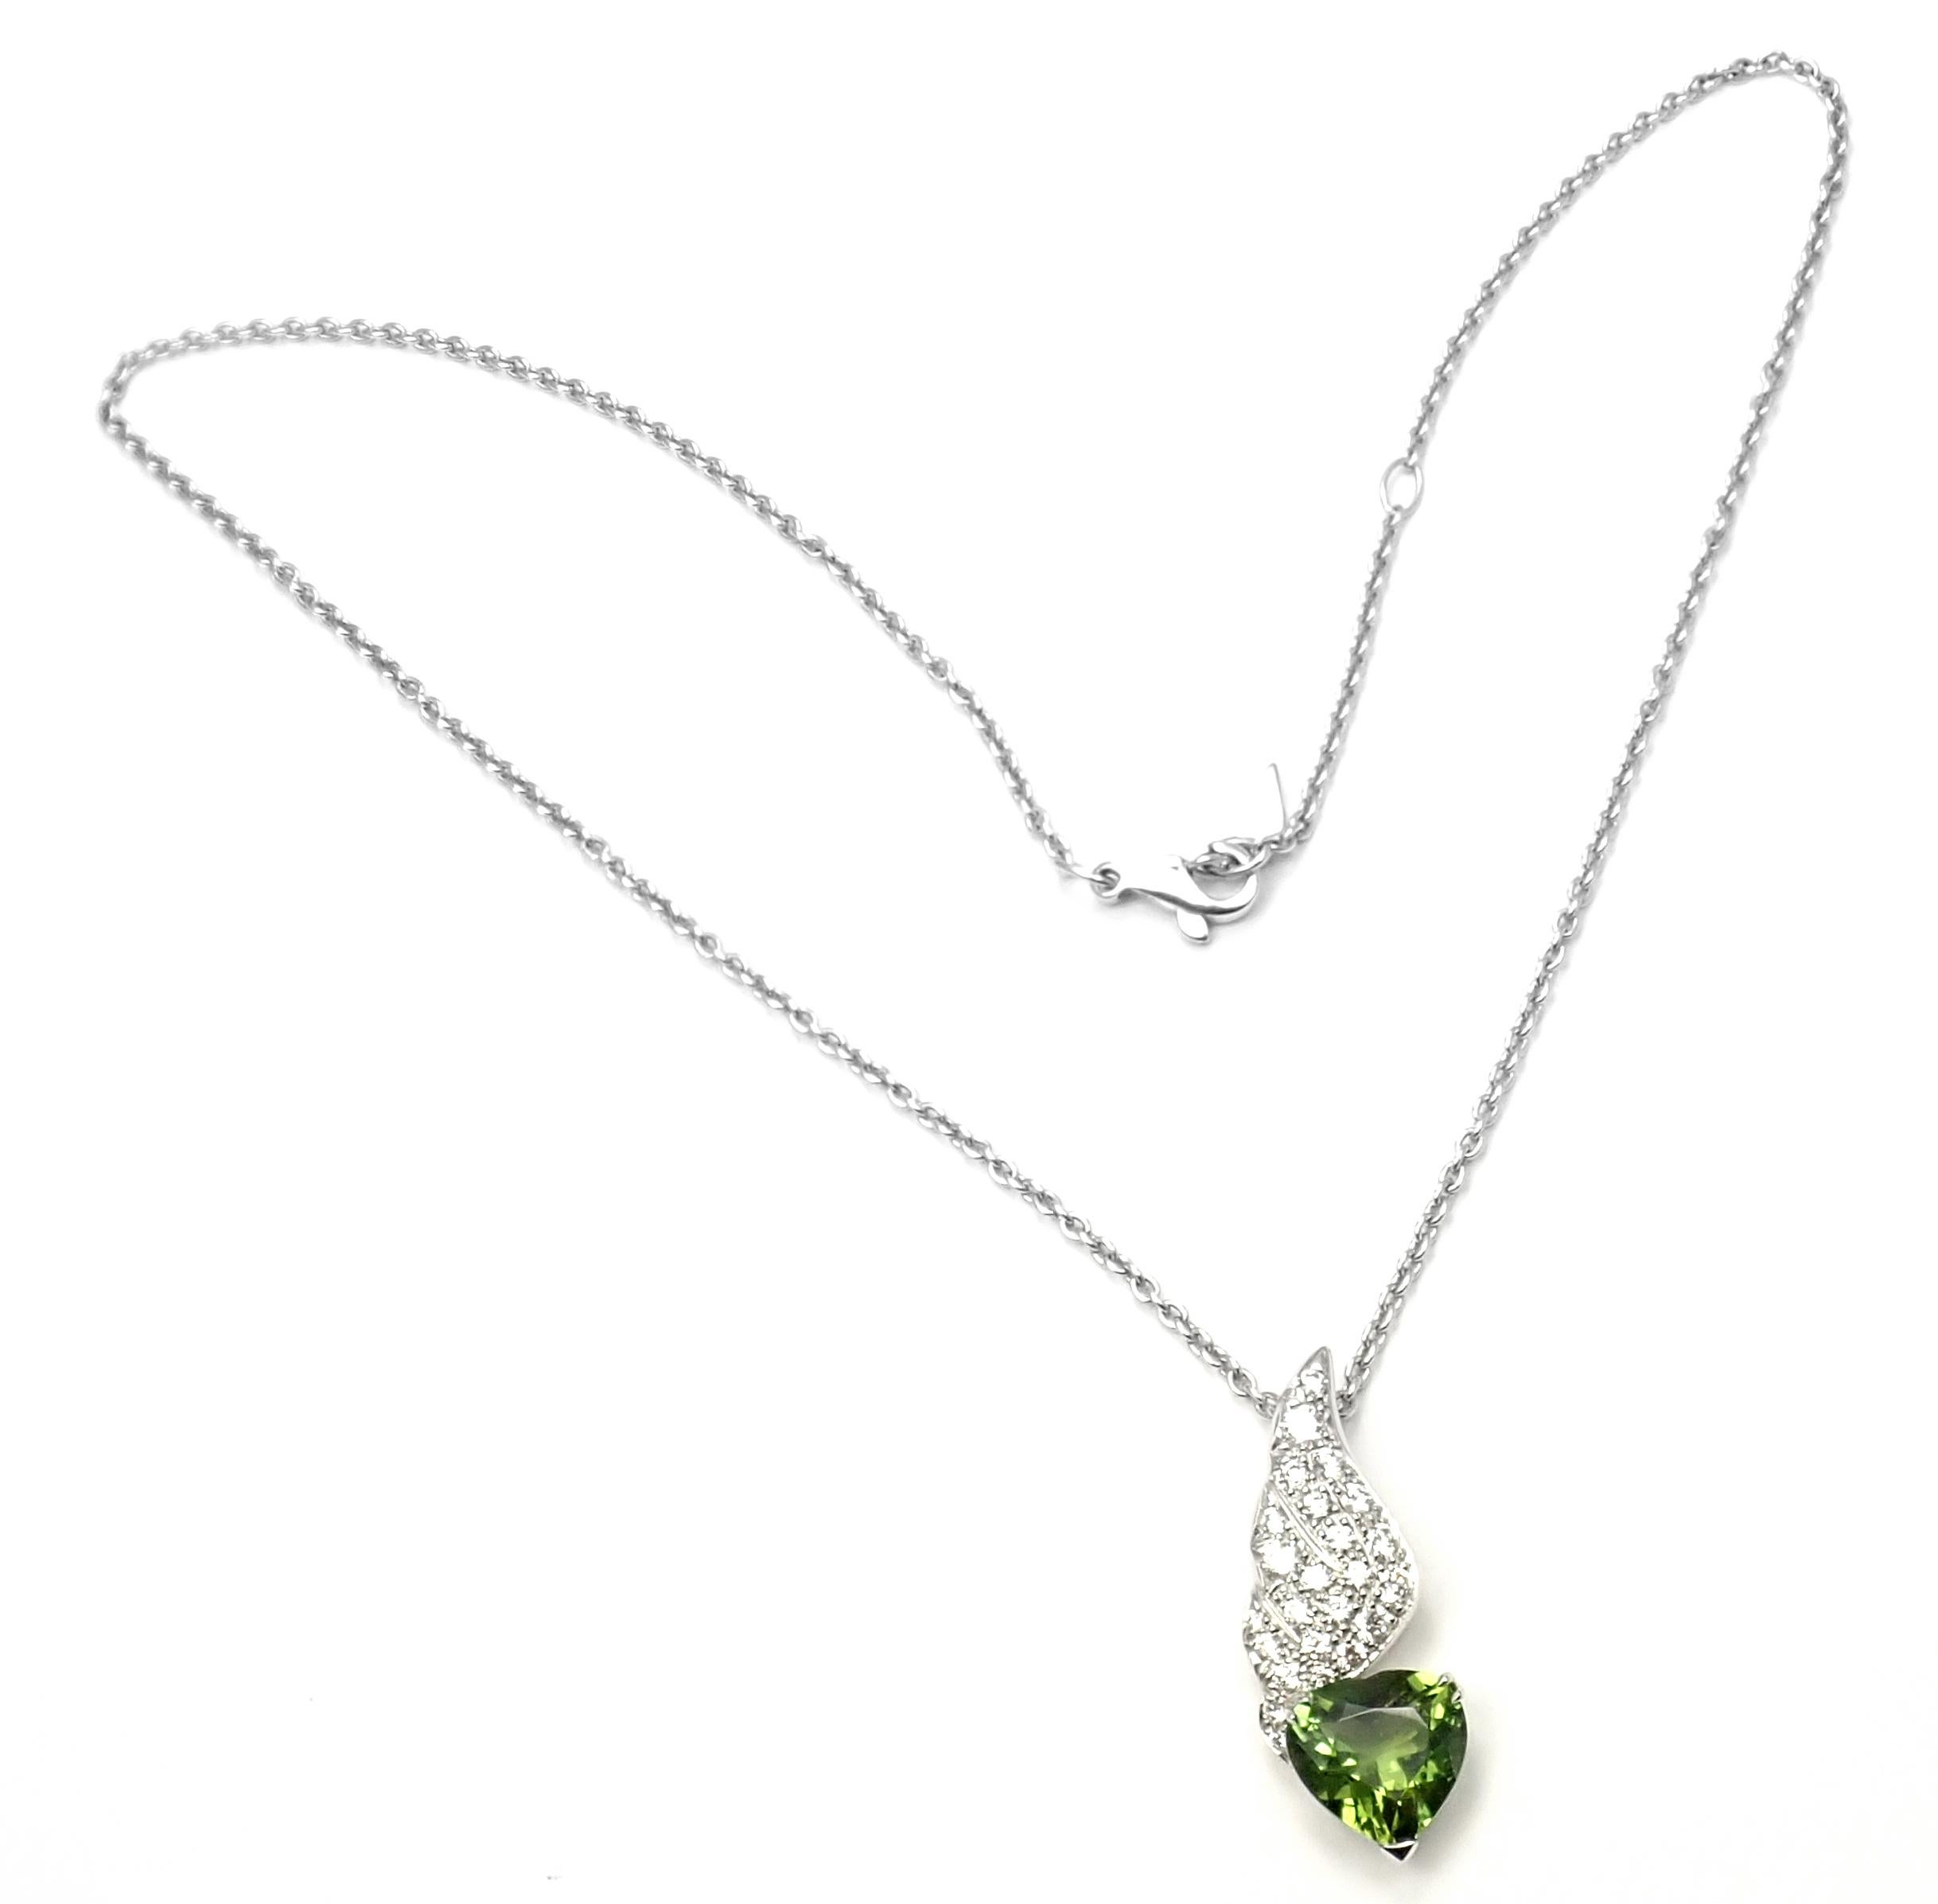 18k White Gold Diamond And Peridot Heart Pendant Necklace by Piaget. 
With round brilliant cut diamonds VS1 clarity, G color total weight approximately .90ct
1 heart shape peridot.
Retail Price: $12,500 plus tax.
Details: 
Length: 17